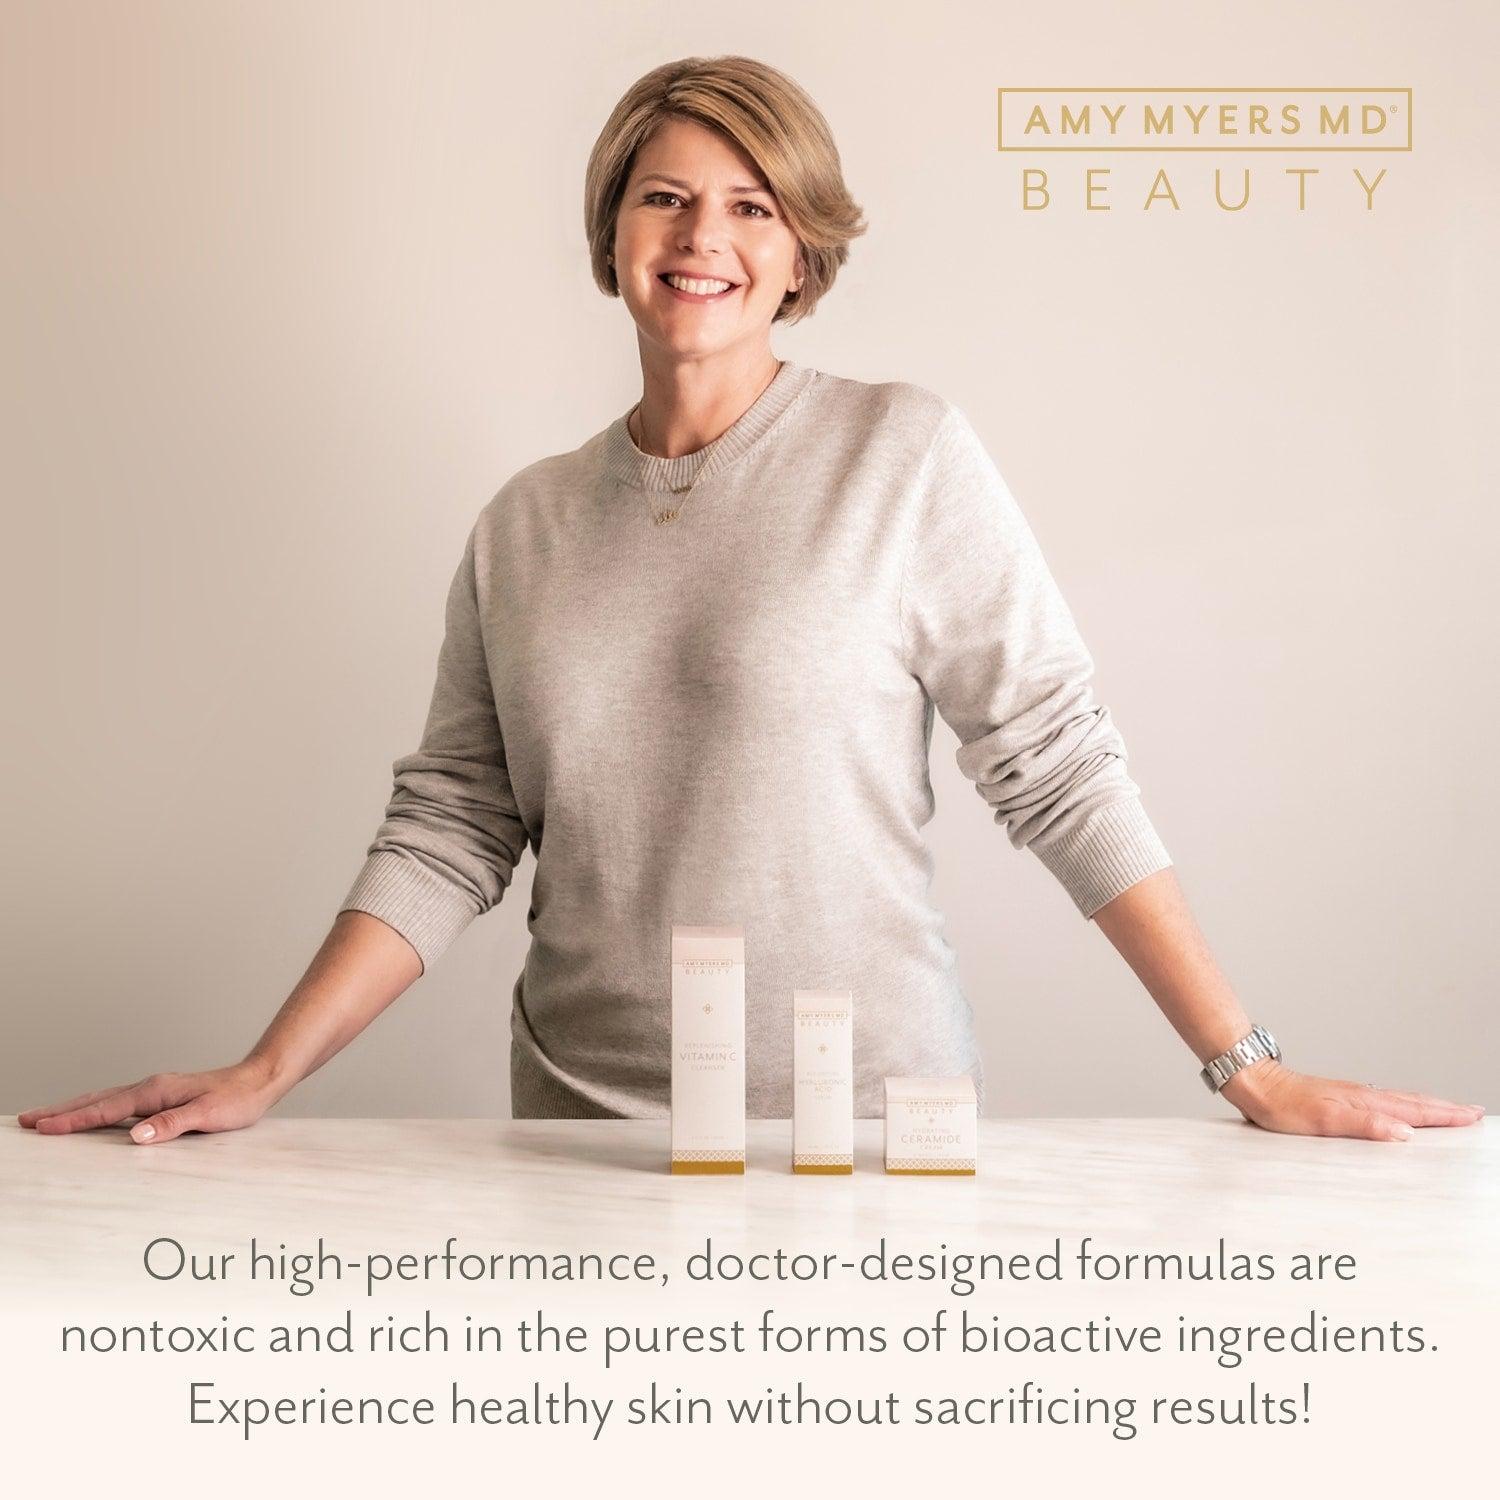 Dr. Amy Myers with her skincare products - Amy Myers MD®